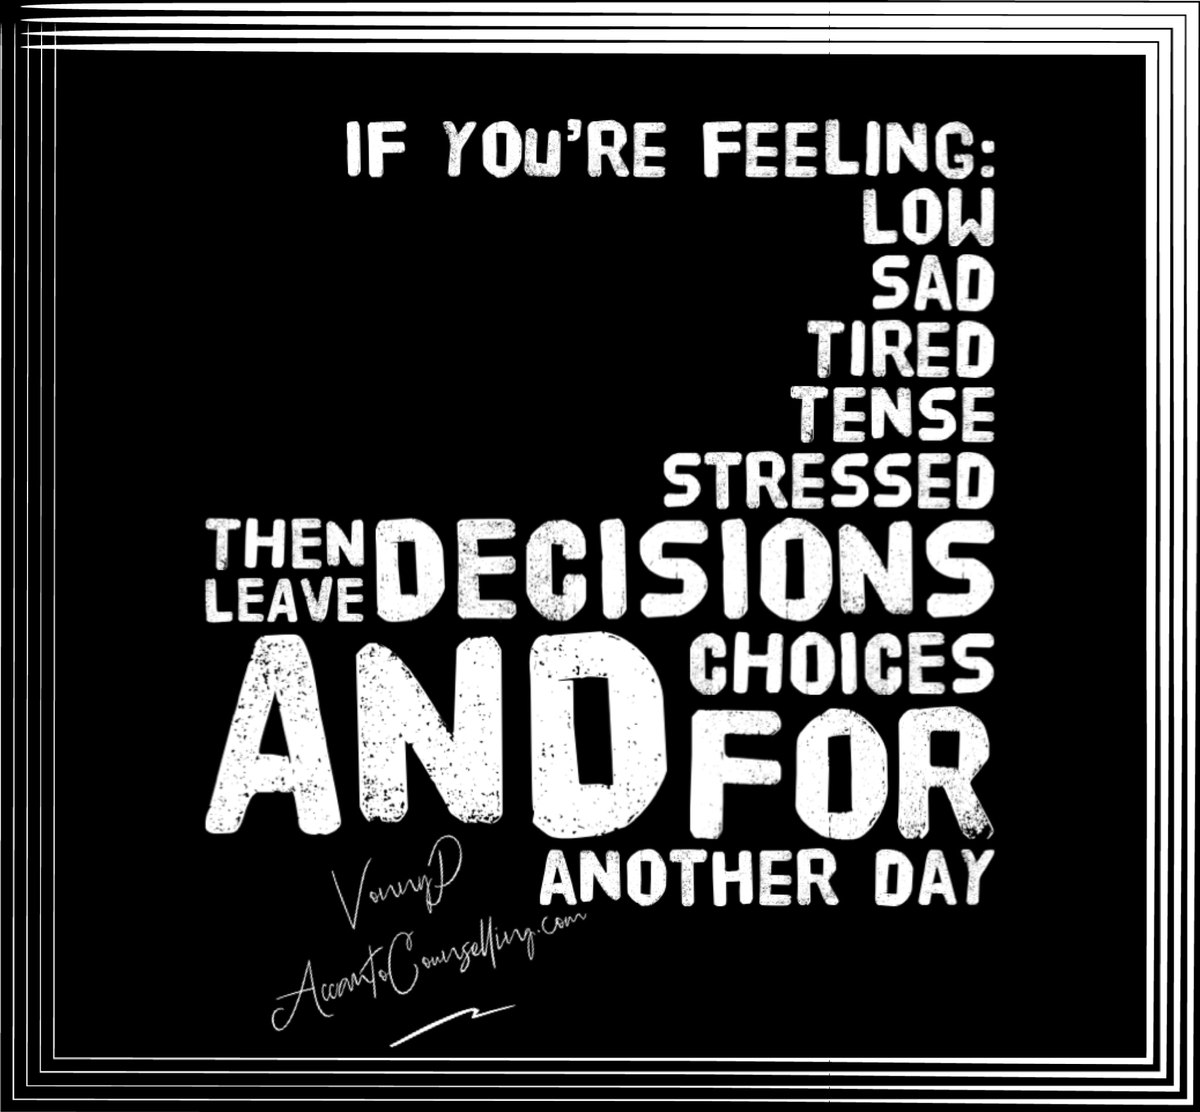 #LeaveDecisions #LeaveChoices #SelfCare